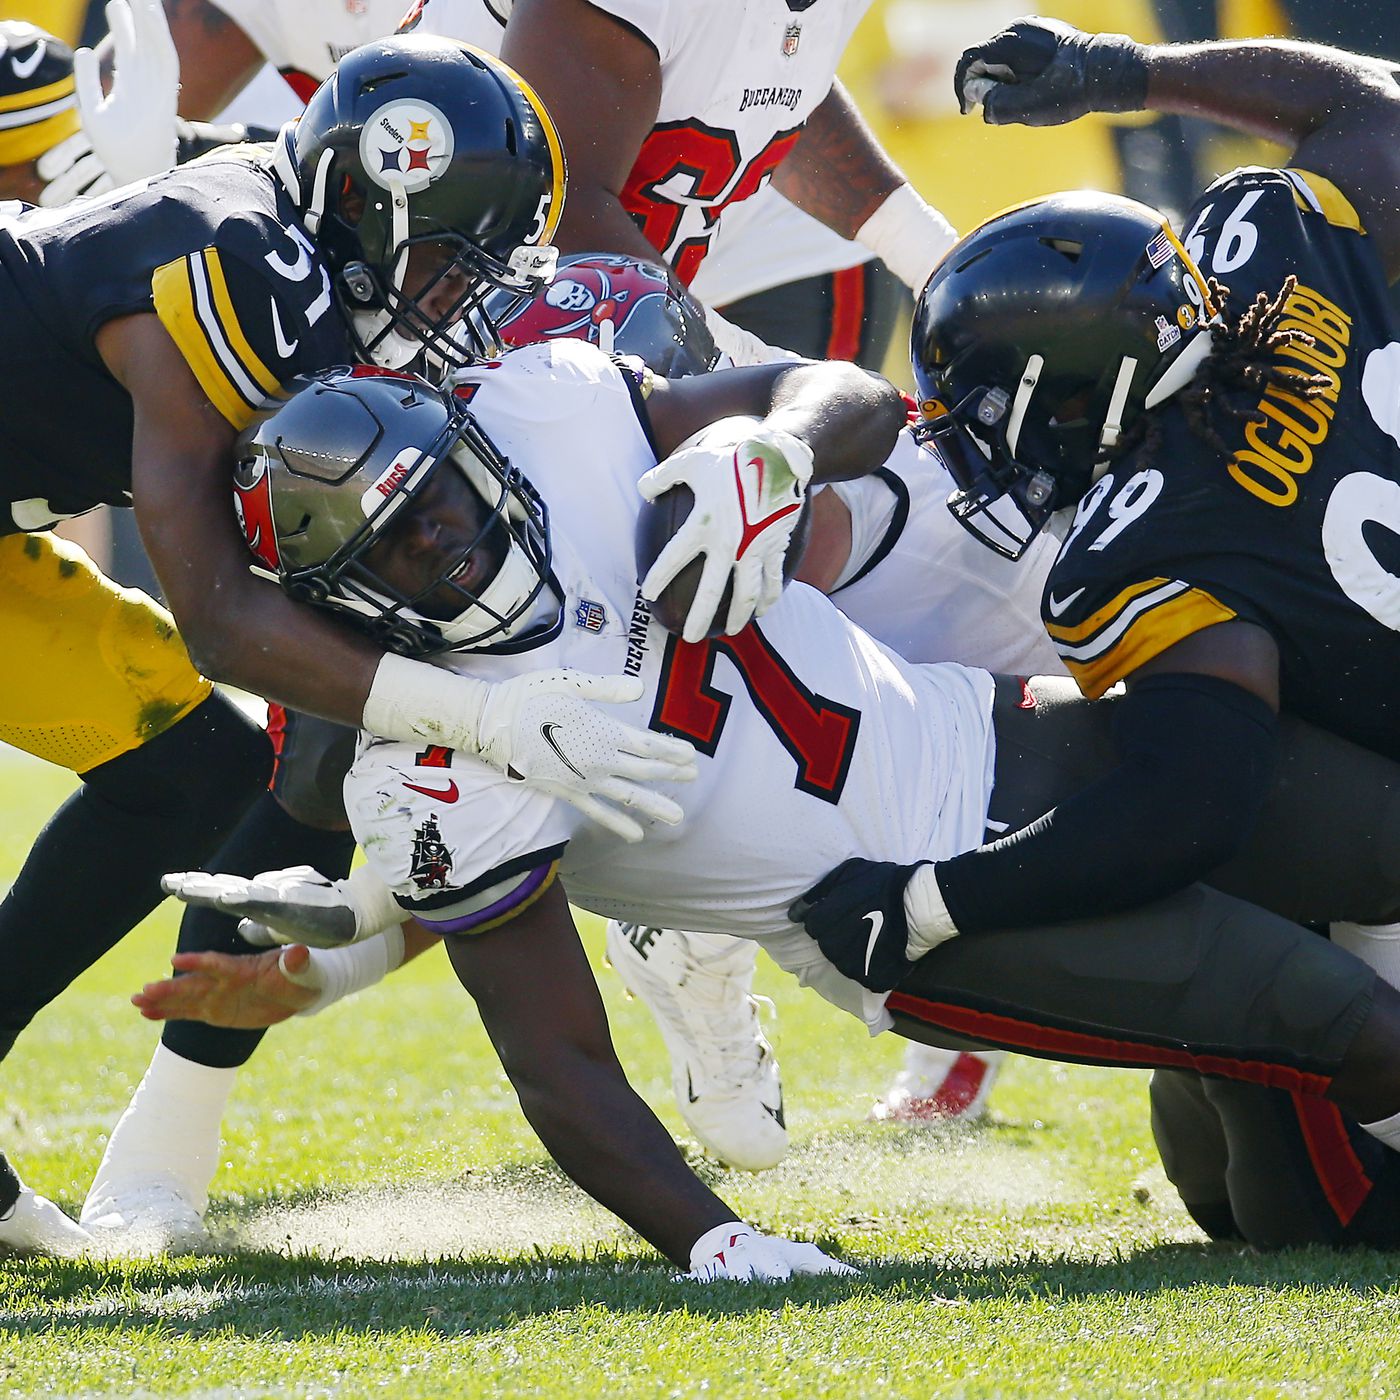 Steelers vs. Bucs: Second-half updates, injury news and open thread -  Behind the Steel Curtain